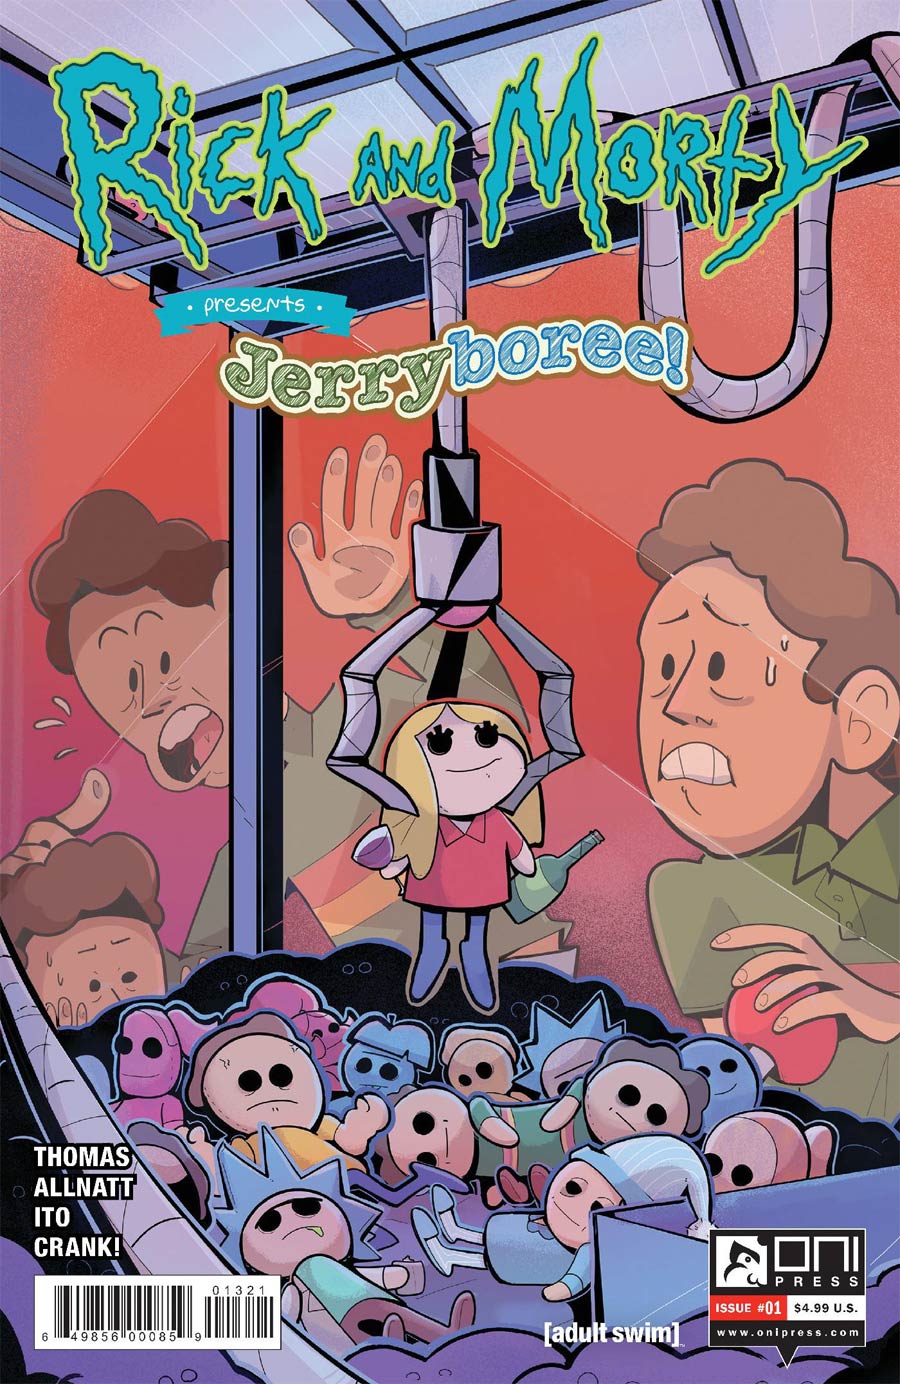 Rick And Morty Presents Jerryboree #1 Cover B Variant Kaycee Campbell Cover